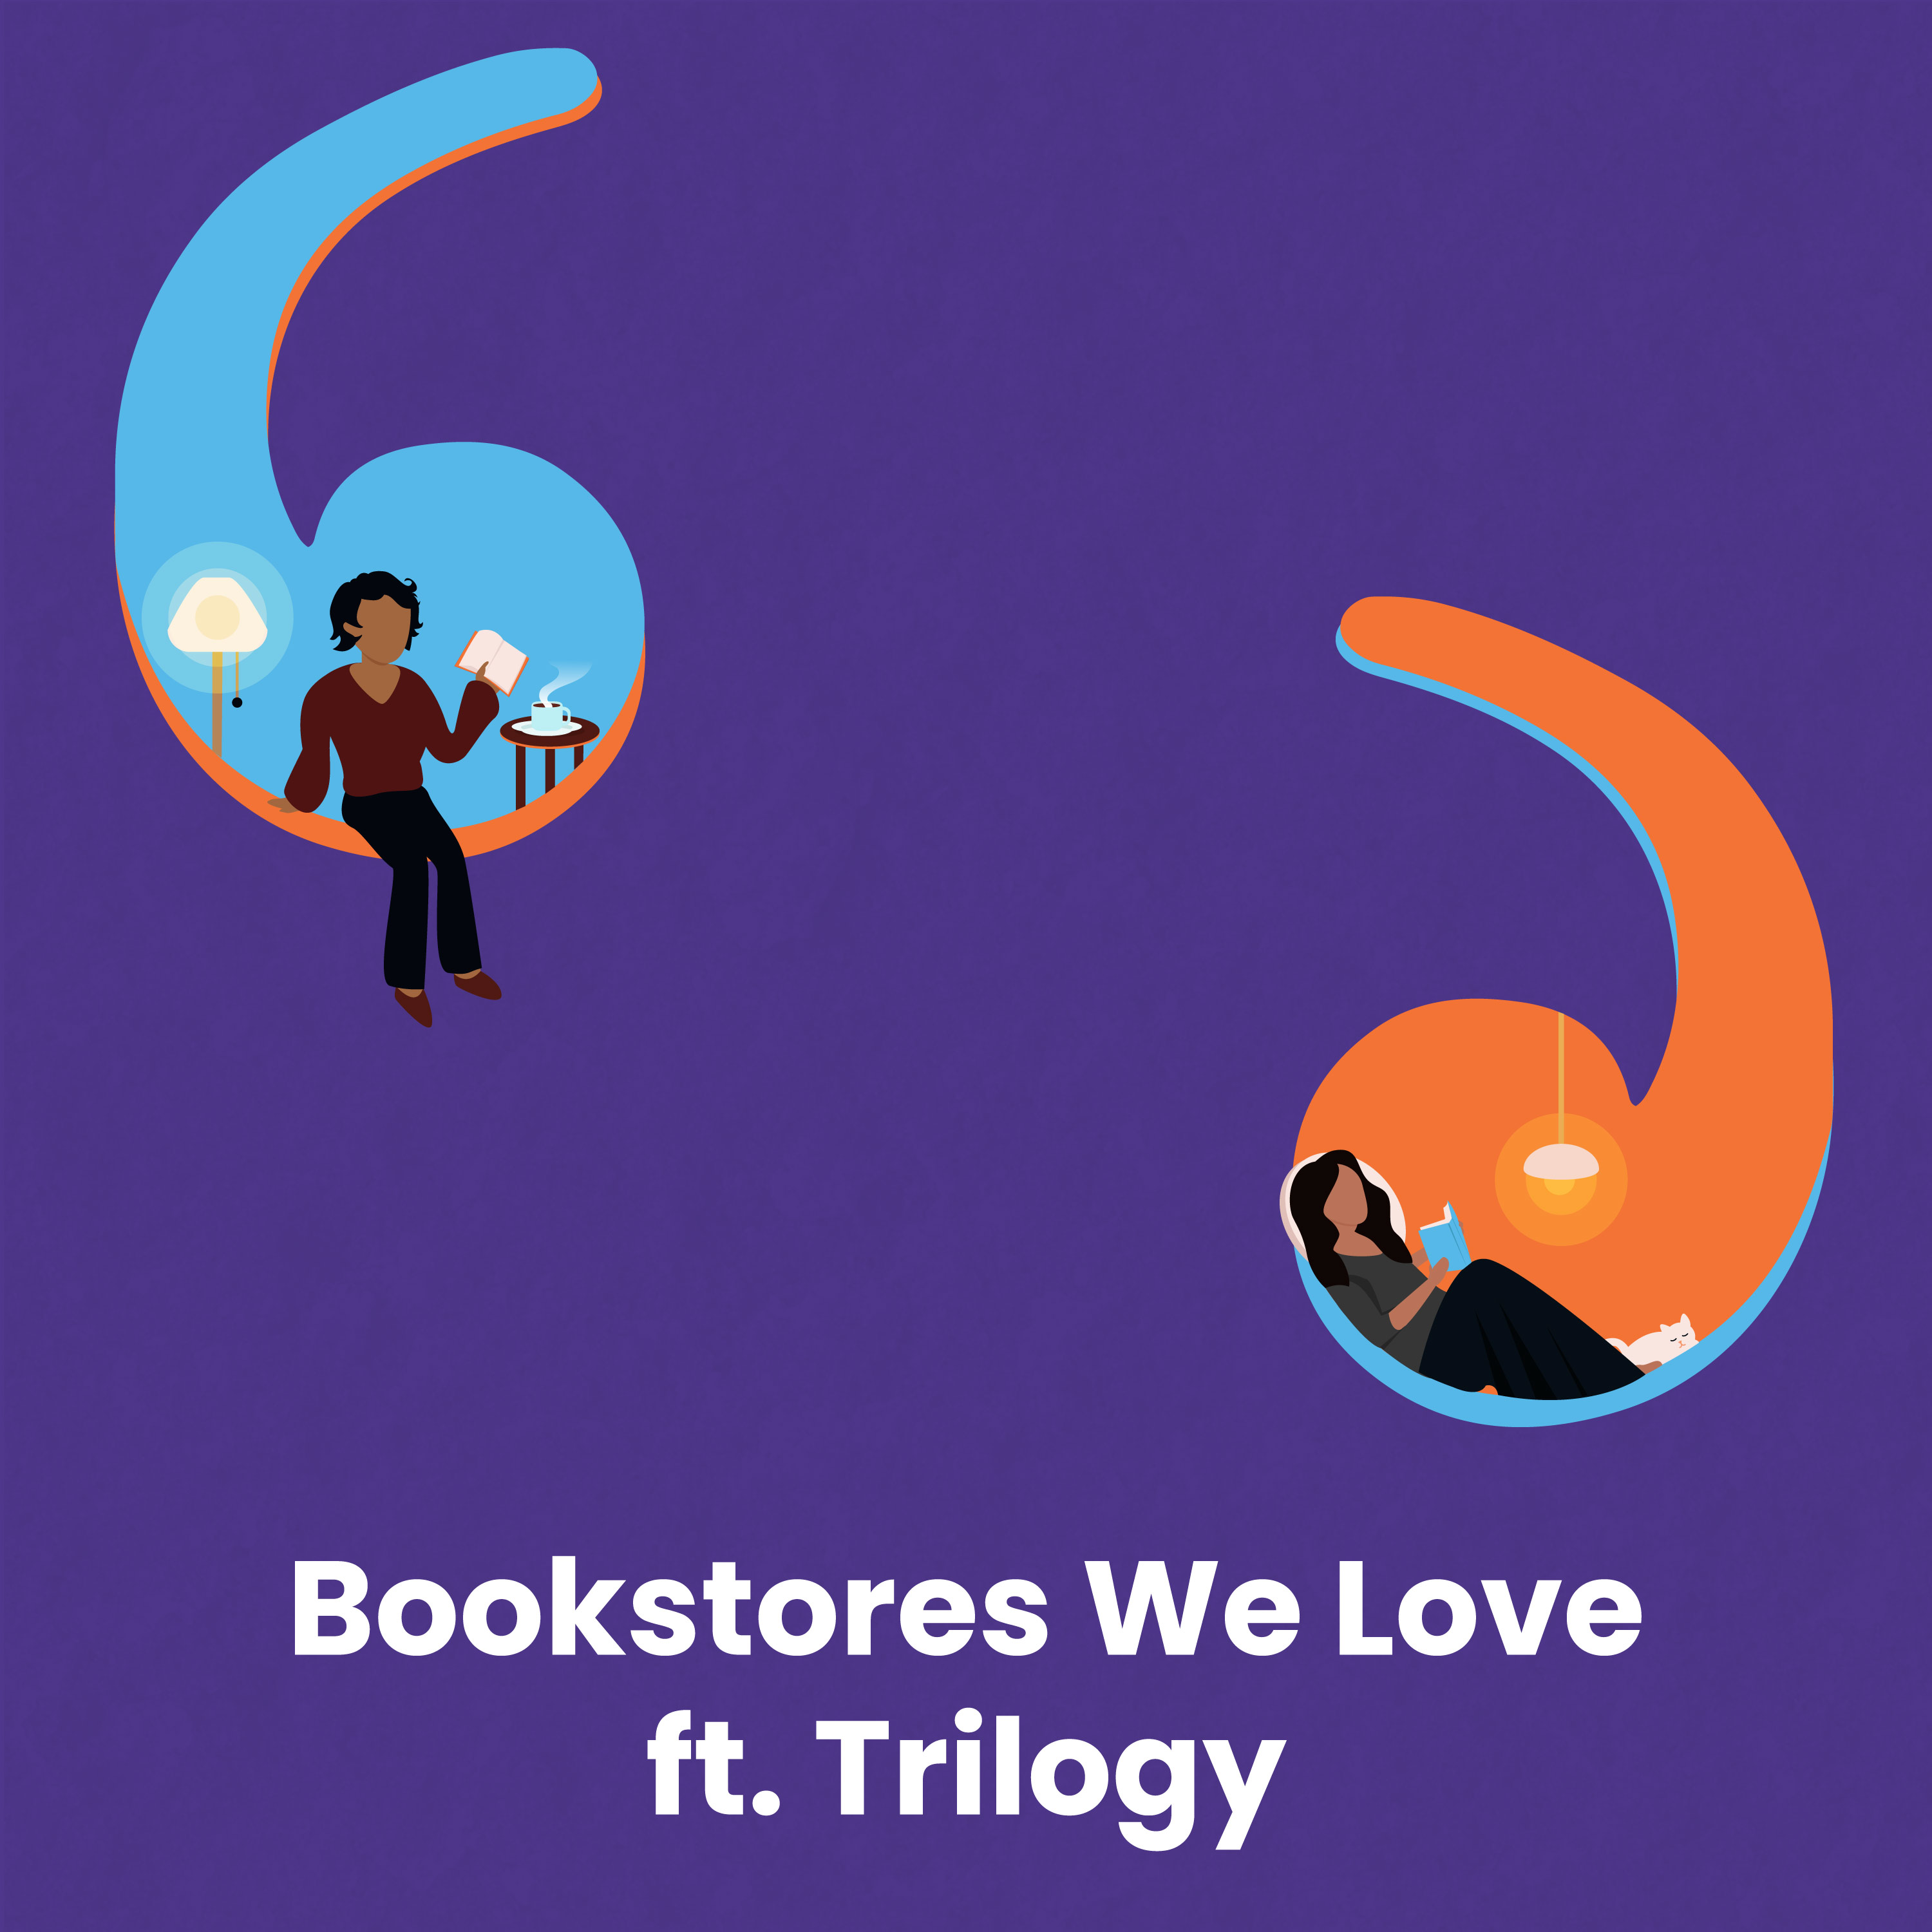 Bookstores We Love ft. Trilogy